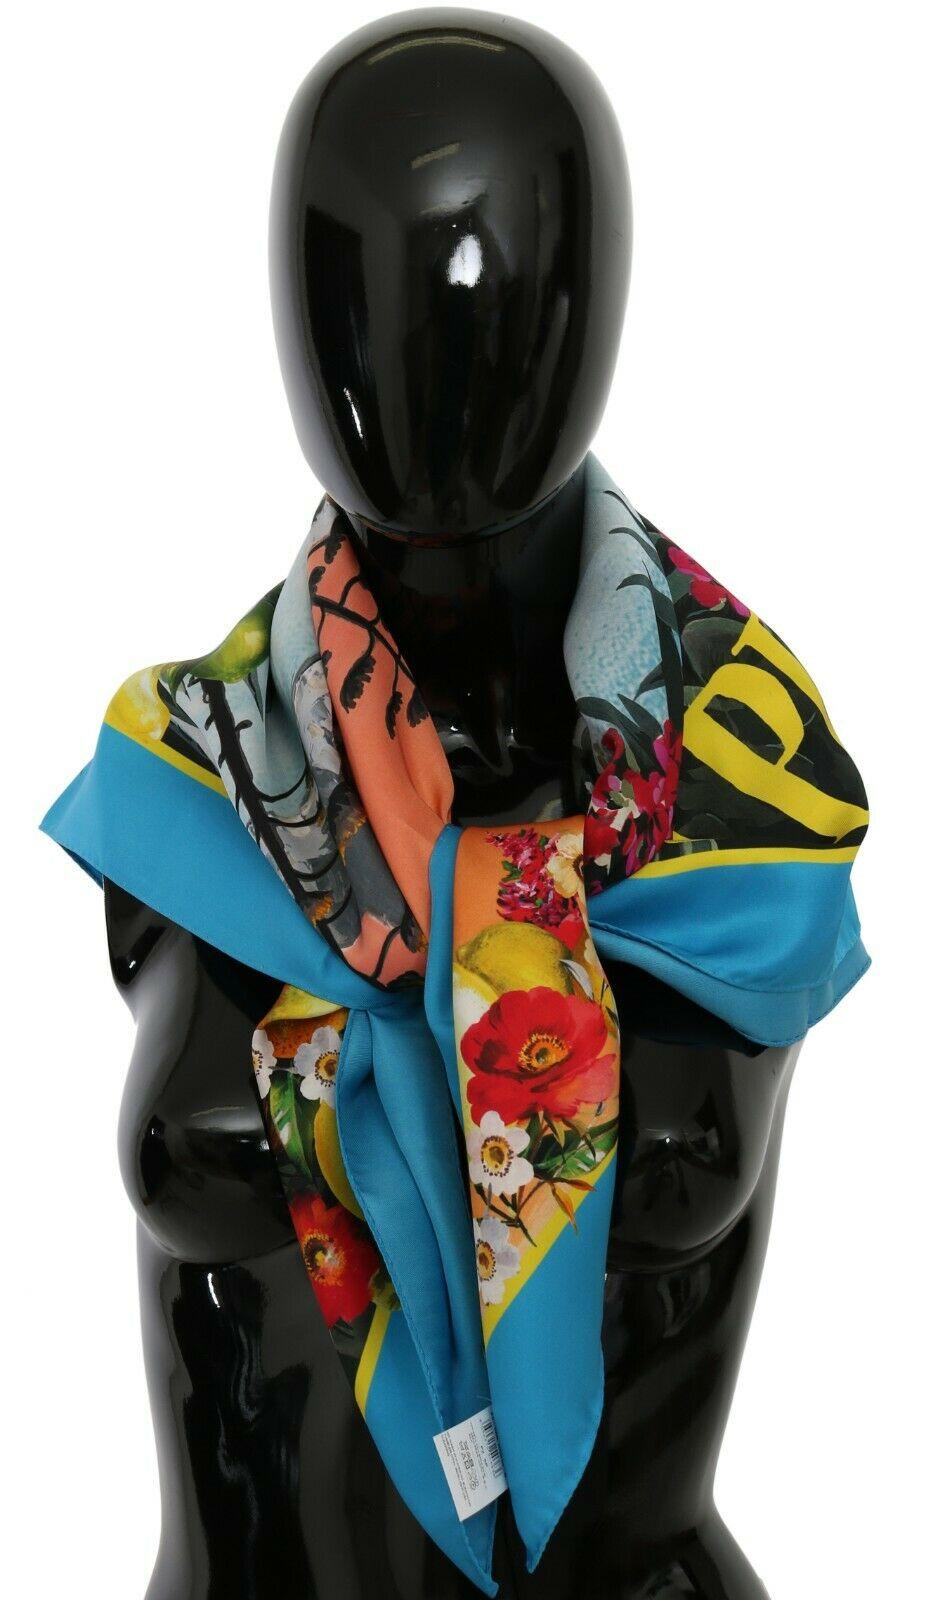  Gorgeous brand new with tags, 100% Authentic Dolce & Gabbana Scarf .


Gender: Women
Color: Multicolor Capri Print

Material: 100% Silk
Logo details
Made in Italy




Size: 90cm x 90cm




Original tags follow.




Please check my other DG